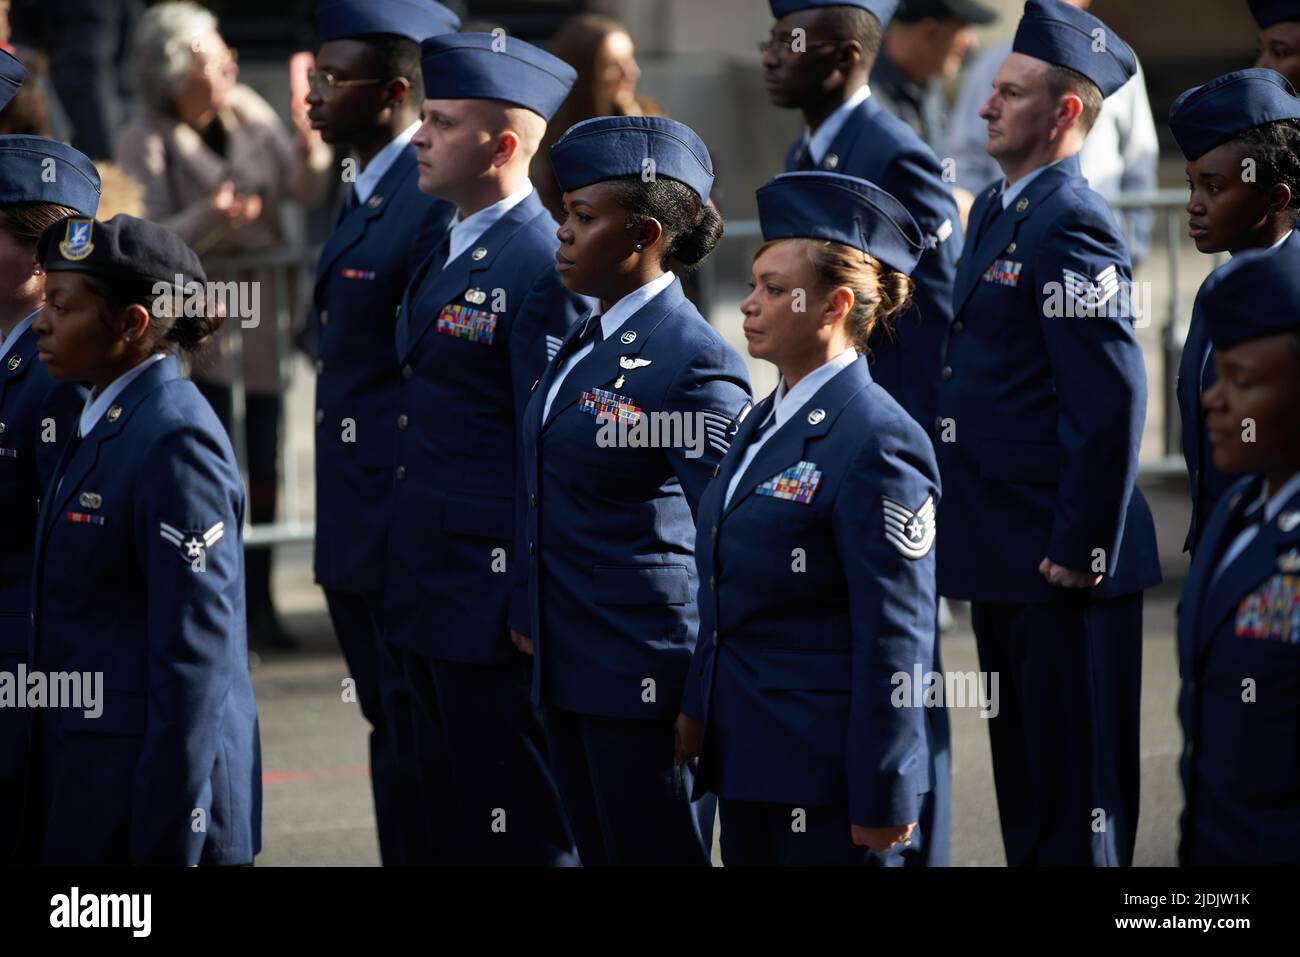 Manhattan, New York, USA - November 11. 2019: Veterans Day on 5th Avenue in NYC, Air Force members. Airmen and Airwomen during parade. Stock Photo